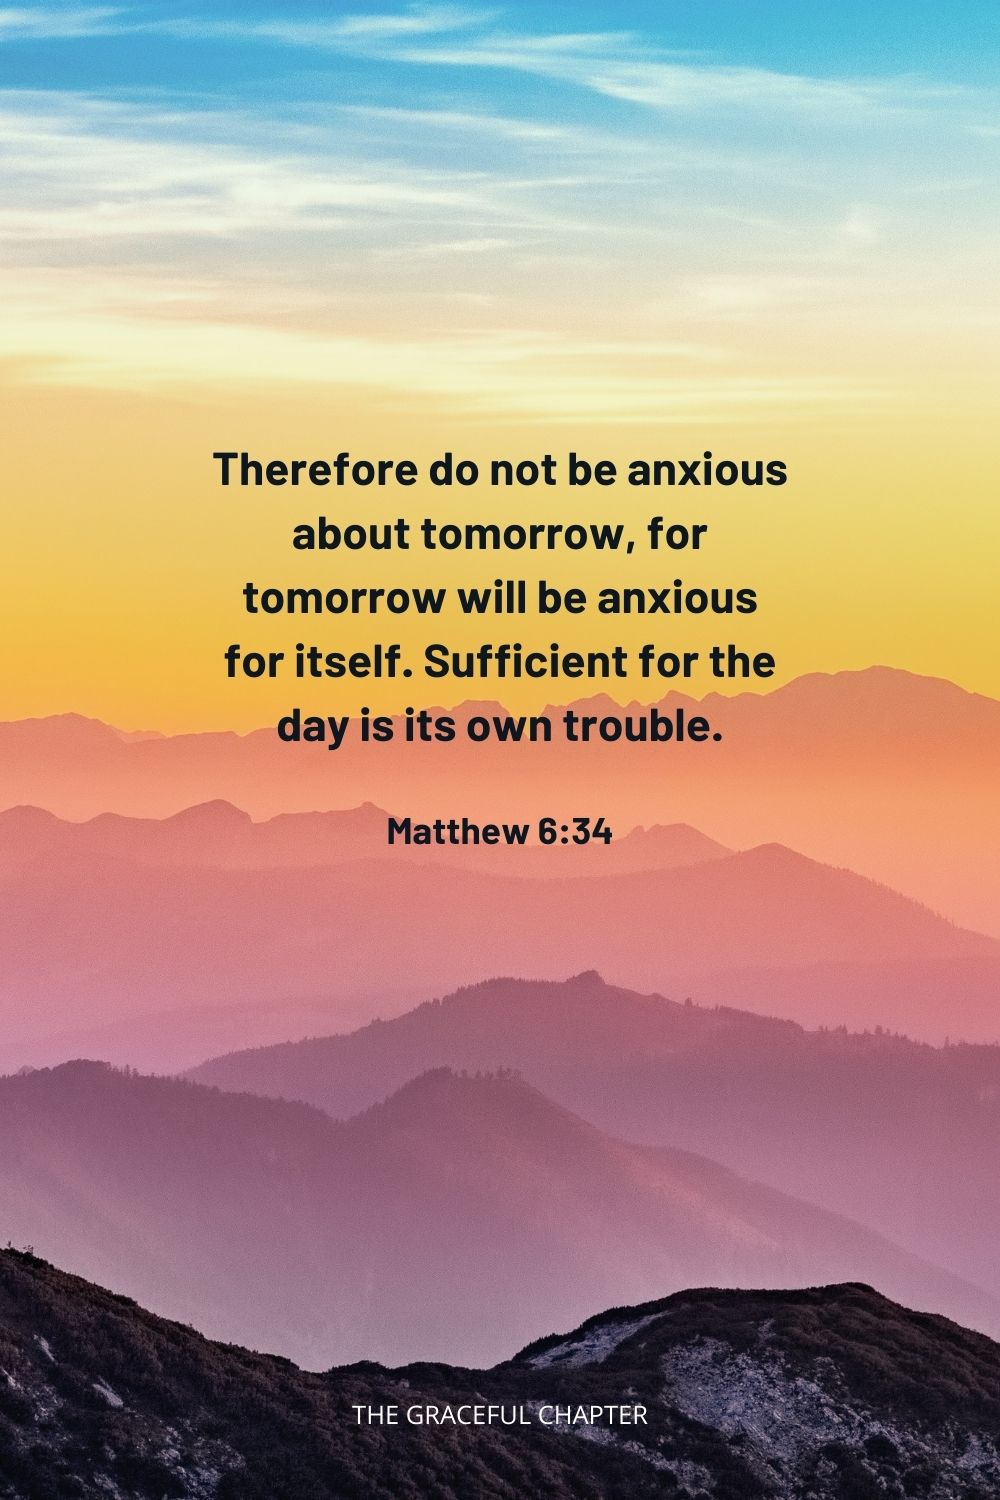 Therefore do not be anxious about tomorrow, for tomorrow will be anxious for itself. Sufficient for the day is its own trouble. Matthew 6:34